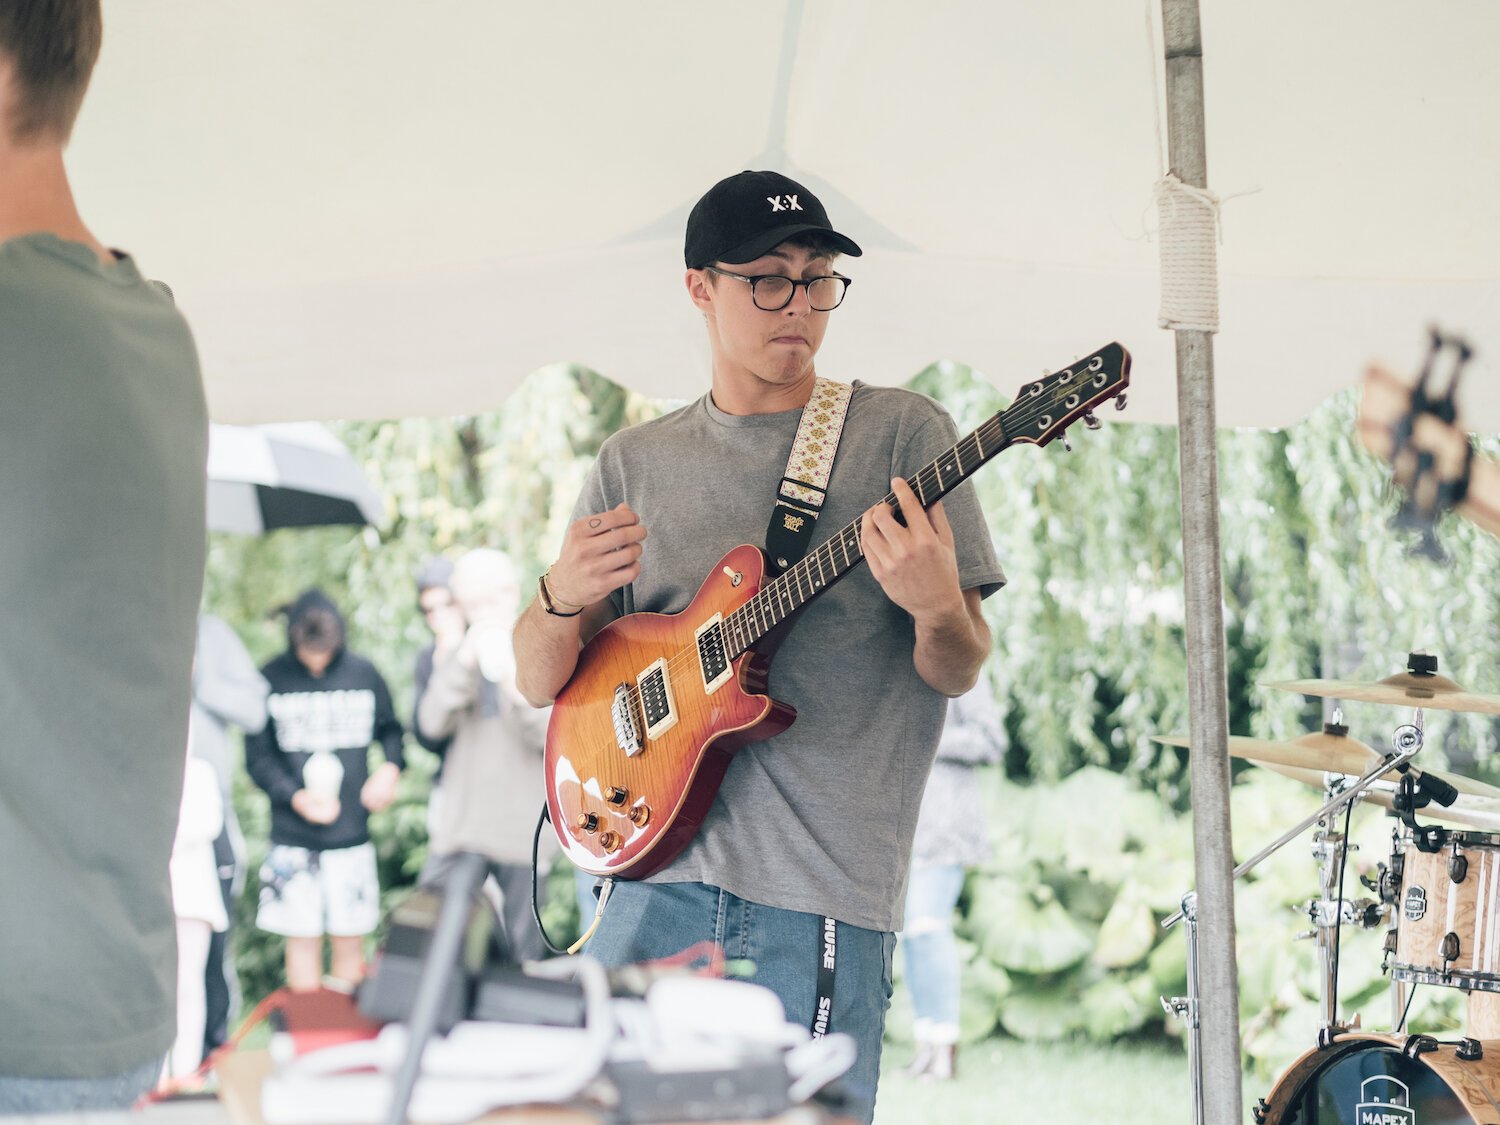 Having opened concerts for nationally known acts, including Citizens and The Brilliance, student Sam Schmidt released his debut single “Paint” in 2020 and has an album on the way.